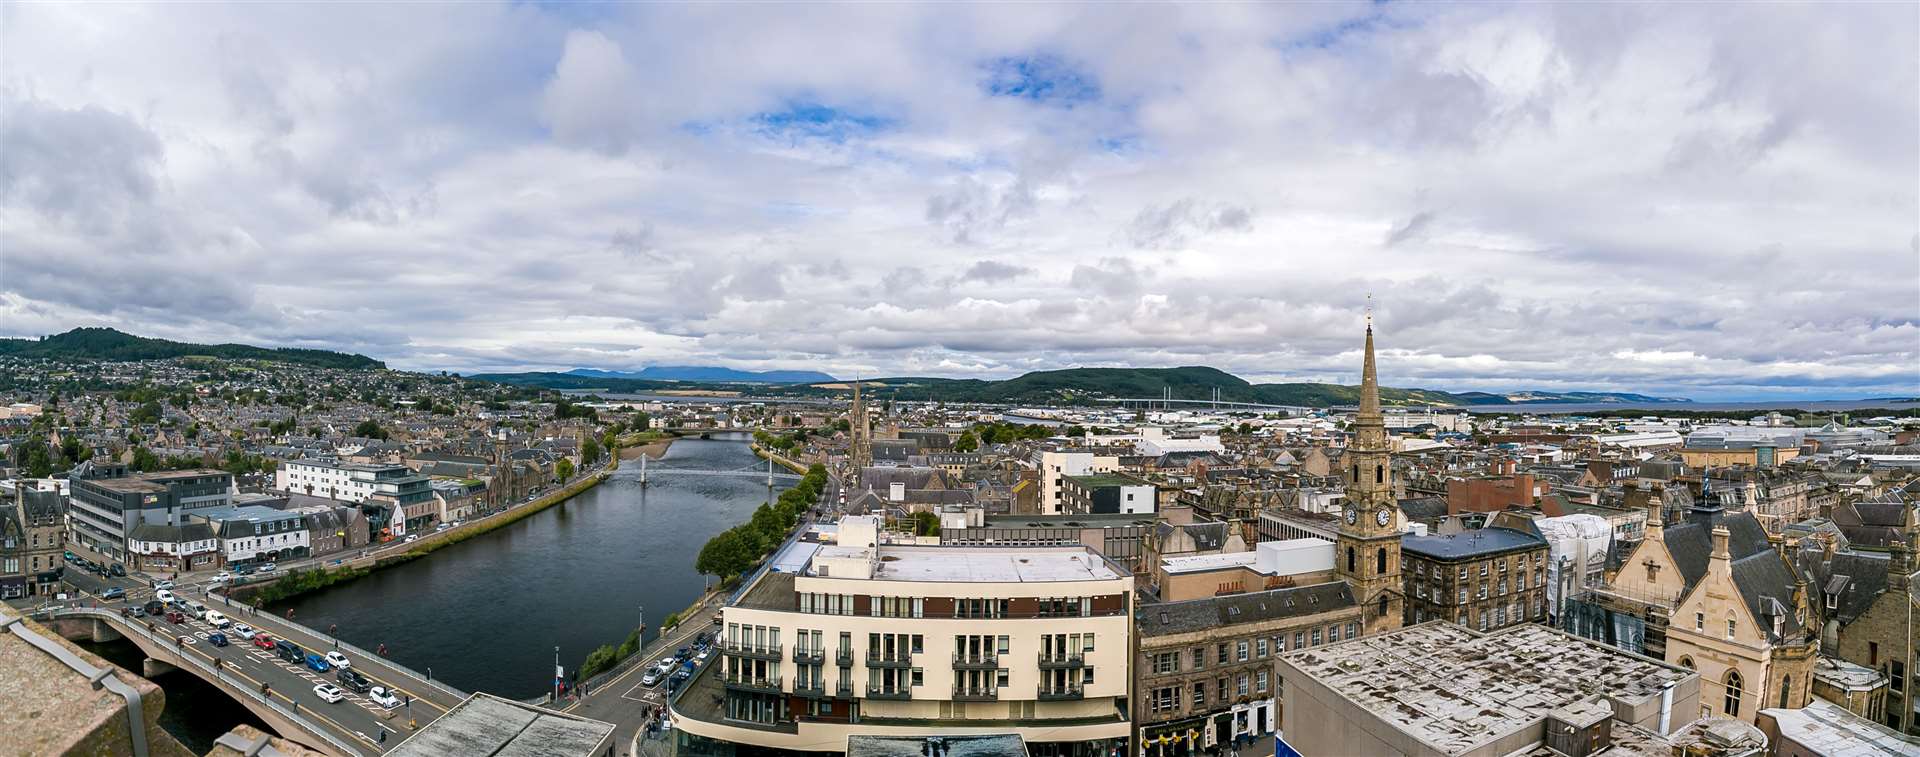 Inverness at cloudy weather in summer, Scotland, uk